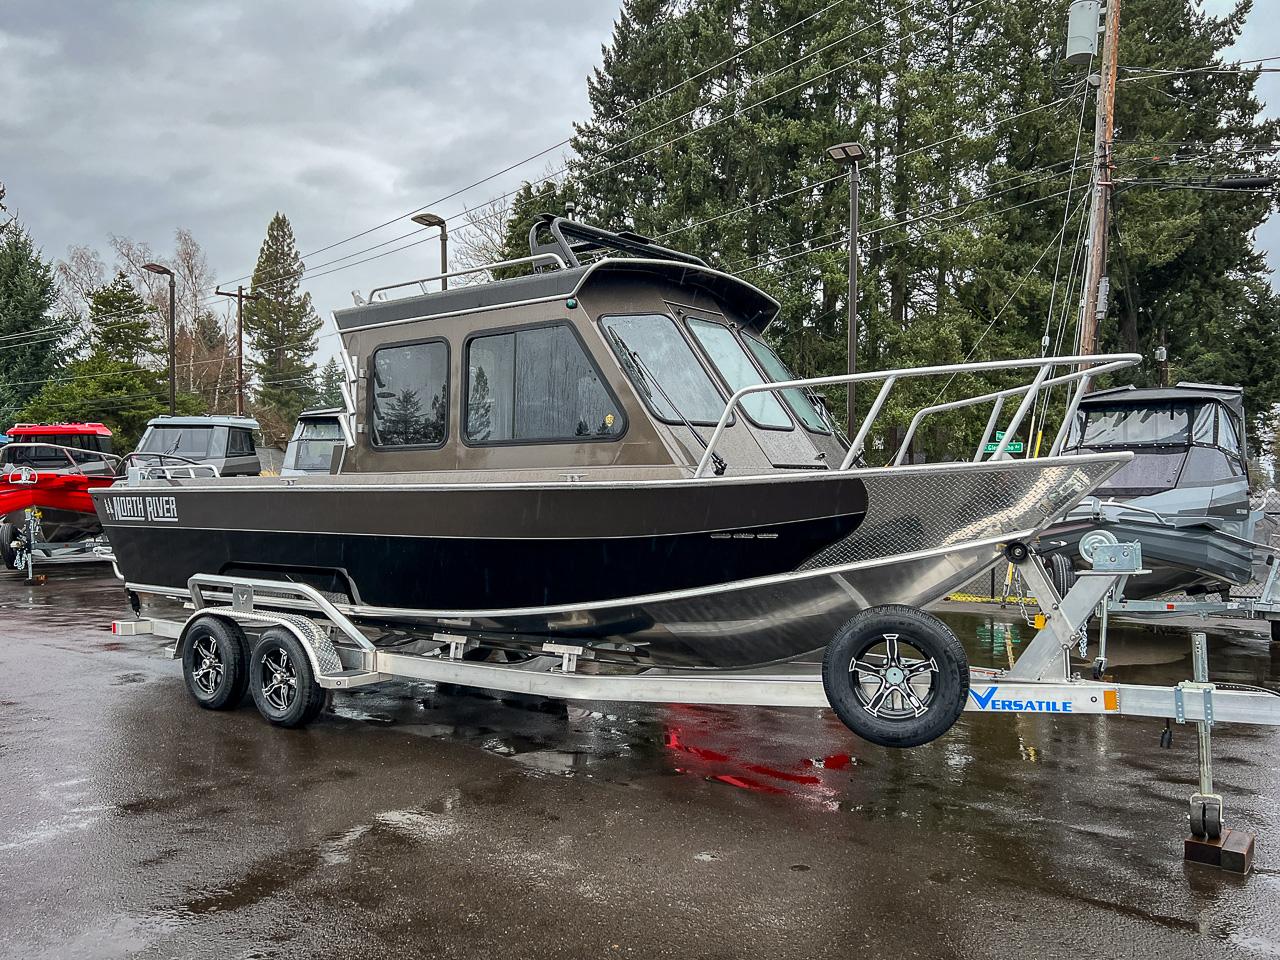 North River 25 Seahawk Ht boats for sale 